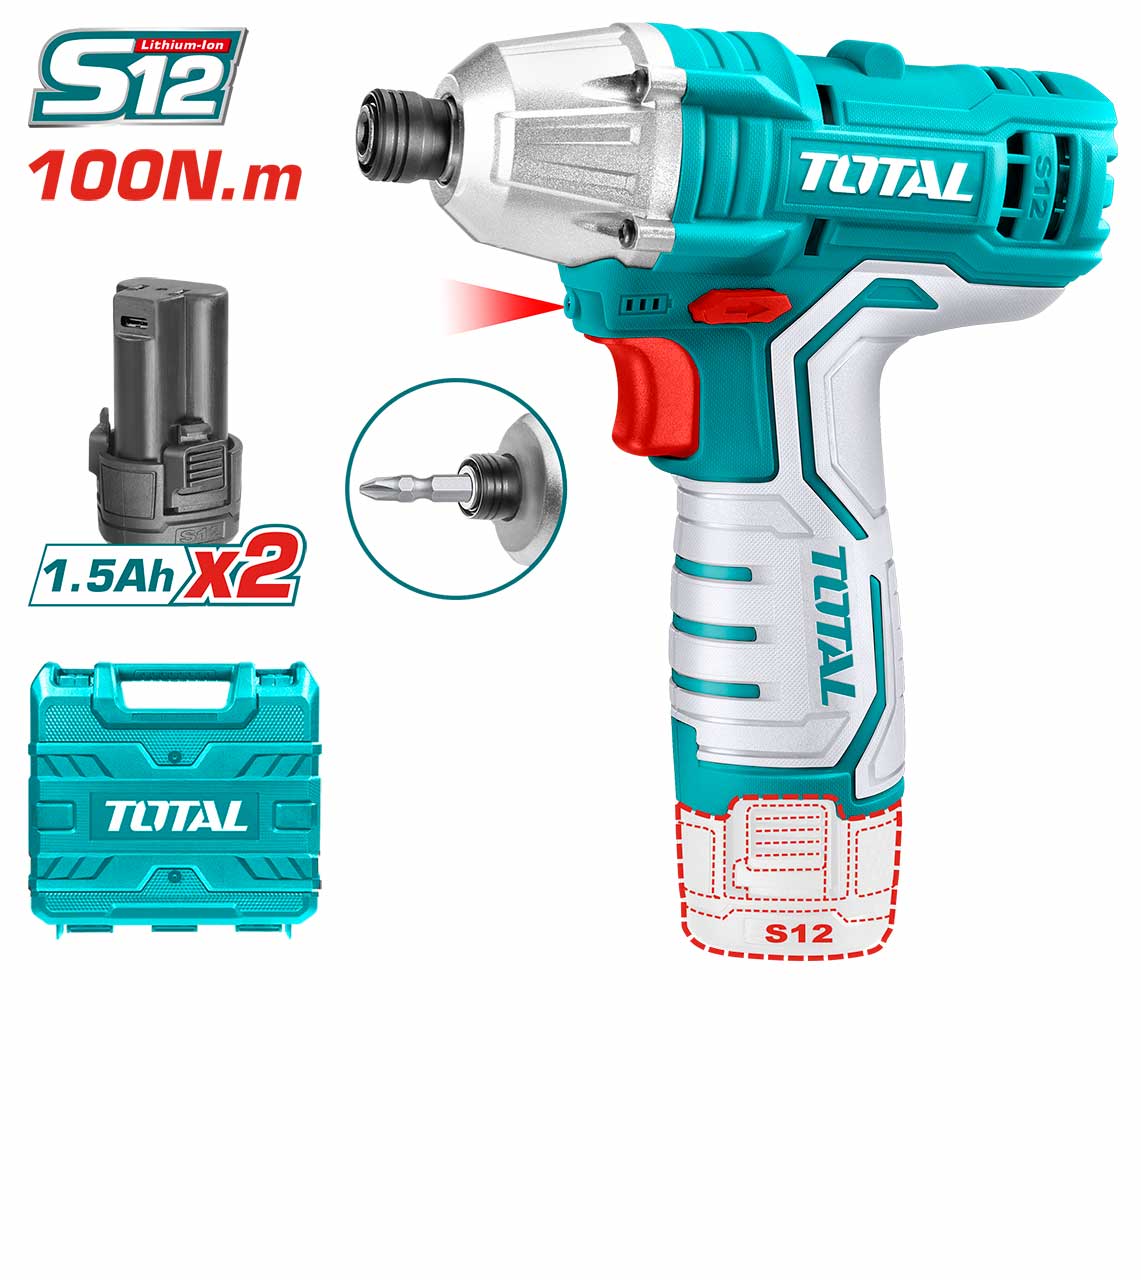 Total Impact Driver Drill Price in Pakistan